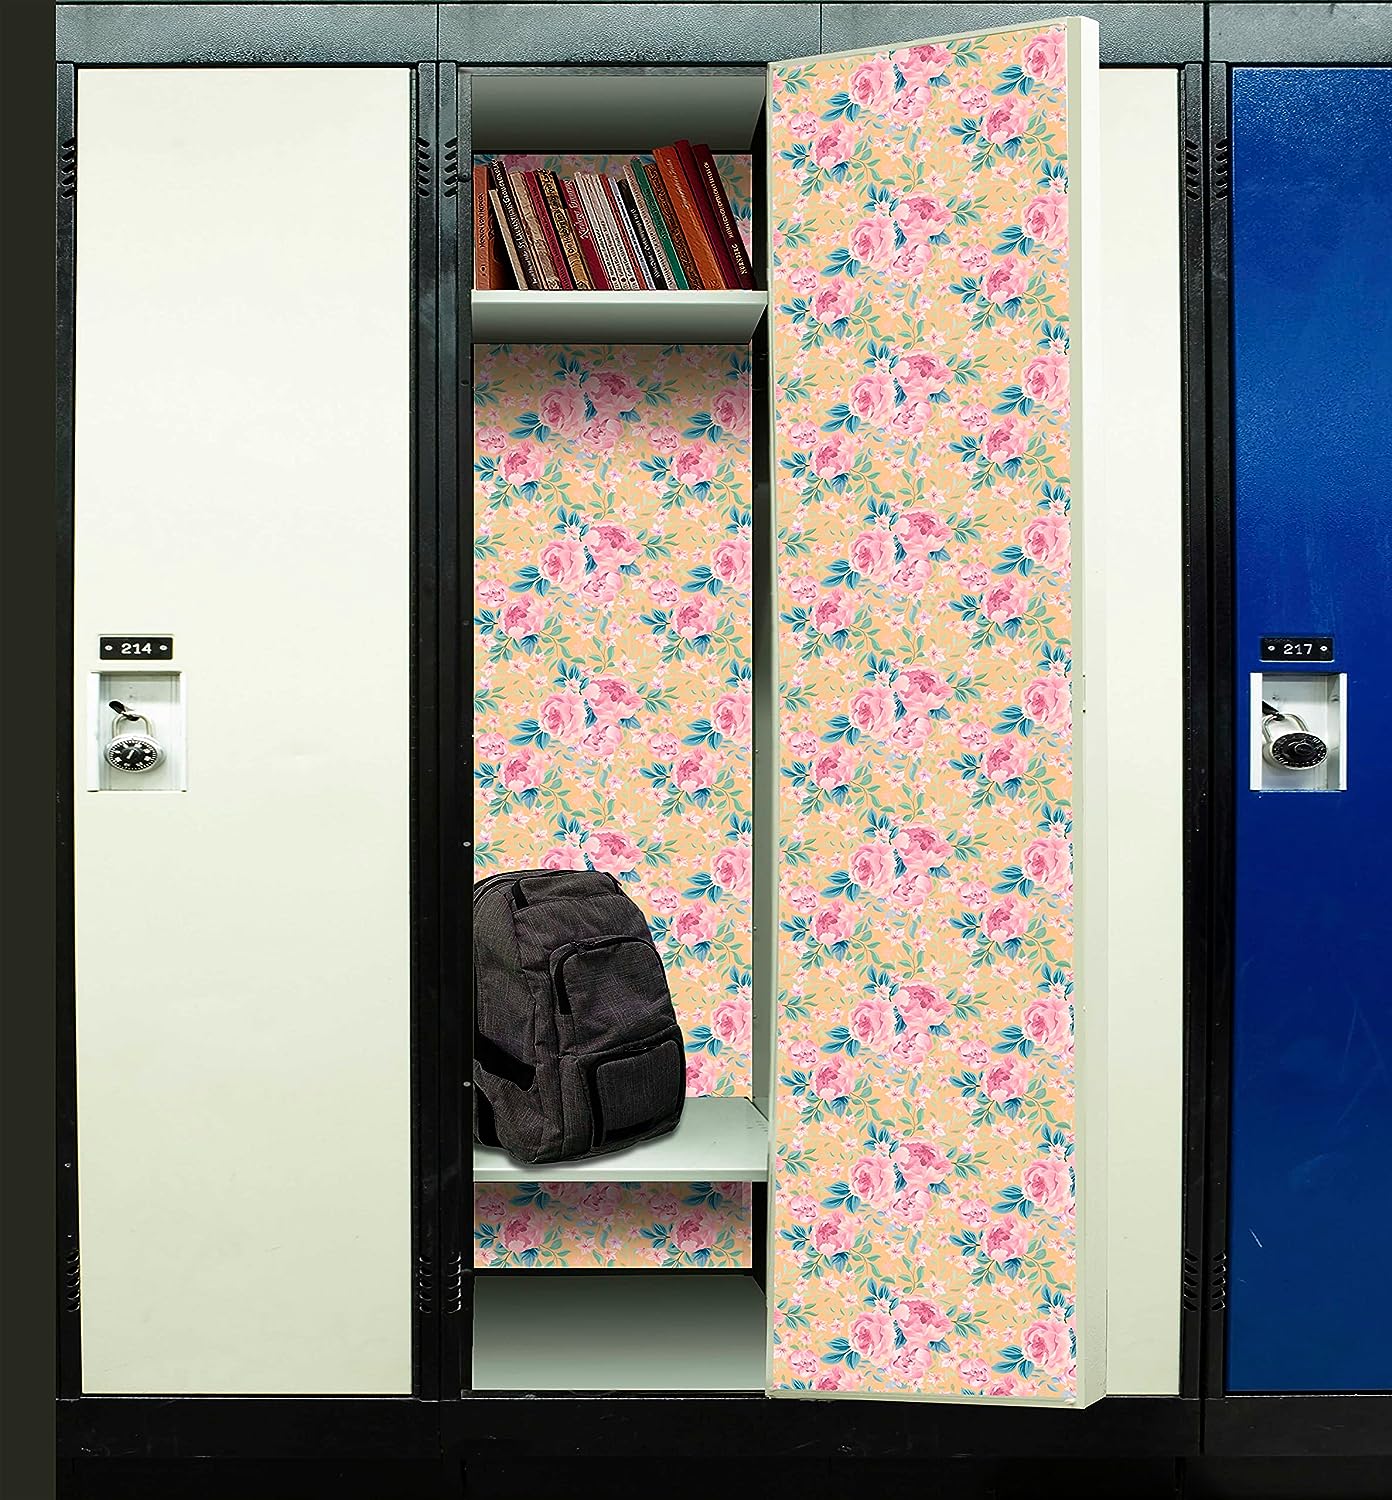 PELICAN INDUSTRIAL Magnetic Locker Wallpaper (Full Sheet Magnetic) - Trimmable, Easy Install, Remove & Reuse - Pack of 3 Sheets - Flowers vb017